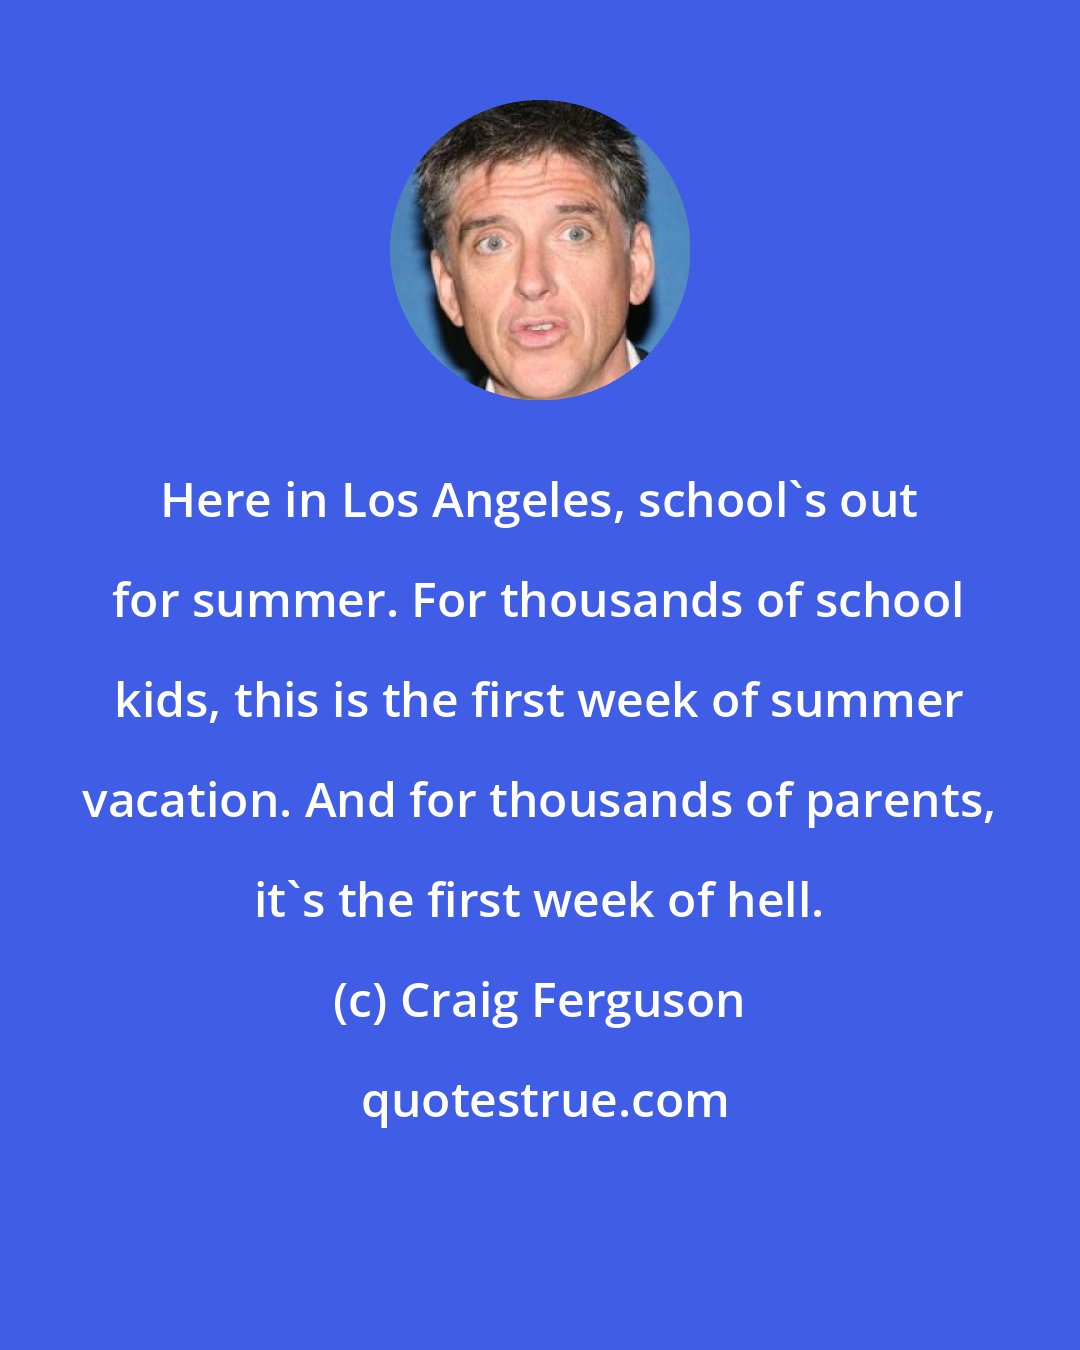 Craig Ferguson: Here in Los Angeles, school's out for summer. For thousands of school kids, this is the first week of summer vacation. And for thousands of parents, it's the first week of hell.